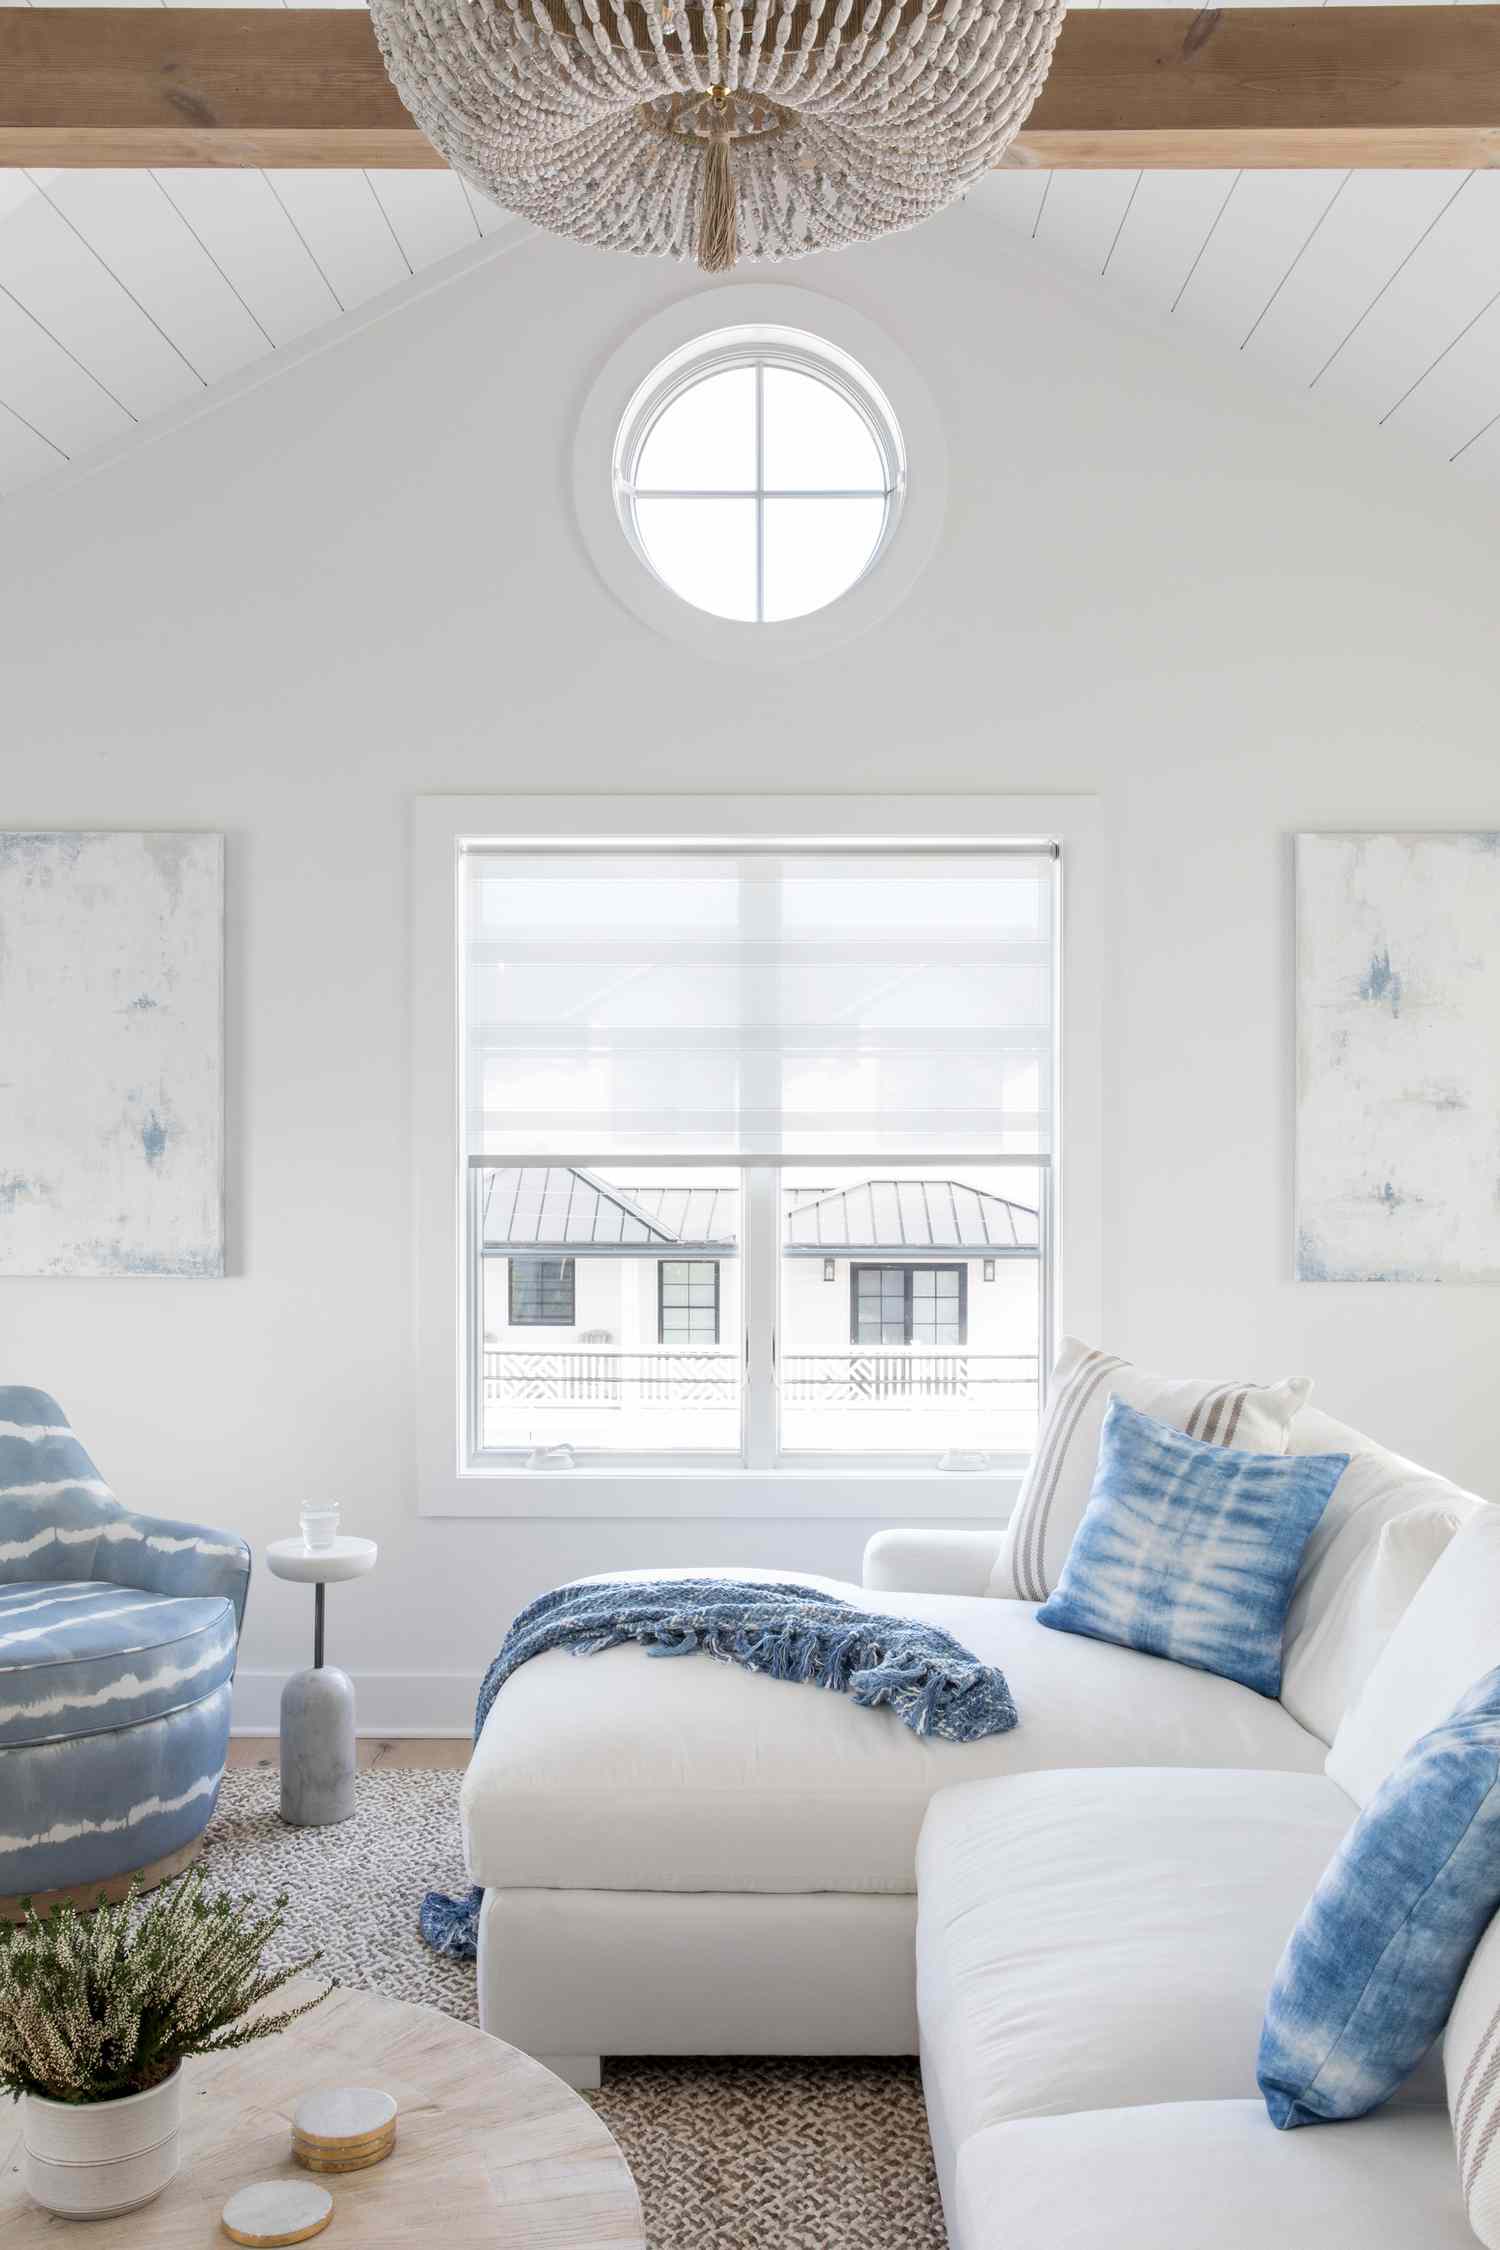 Karen B. Wolfe's Long Beach Island living area with portal windows and raised ceilings